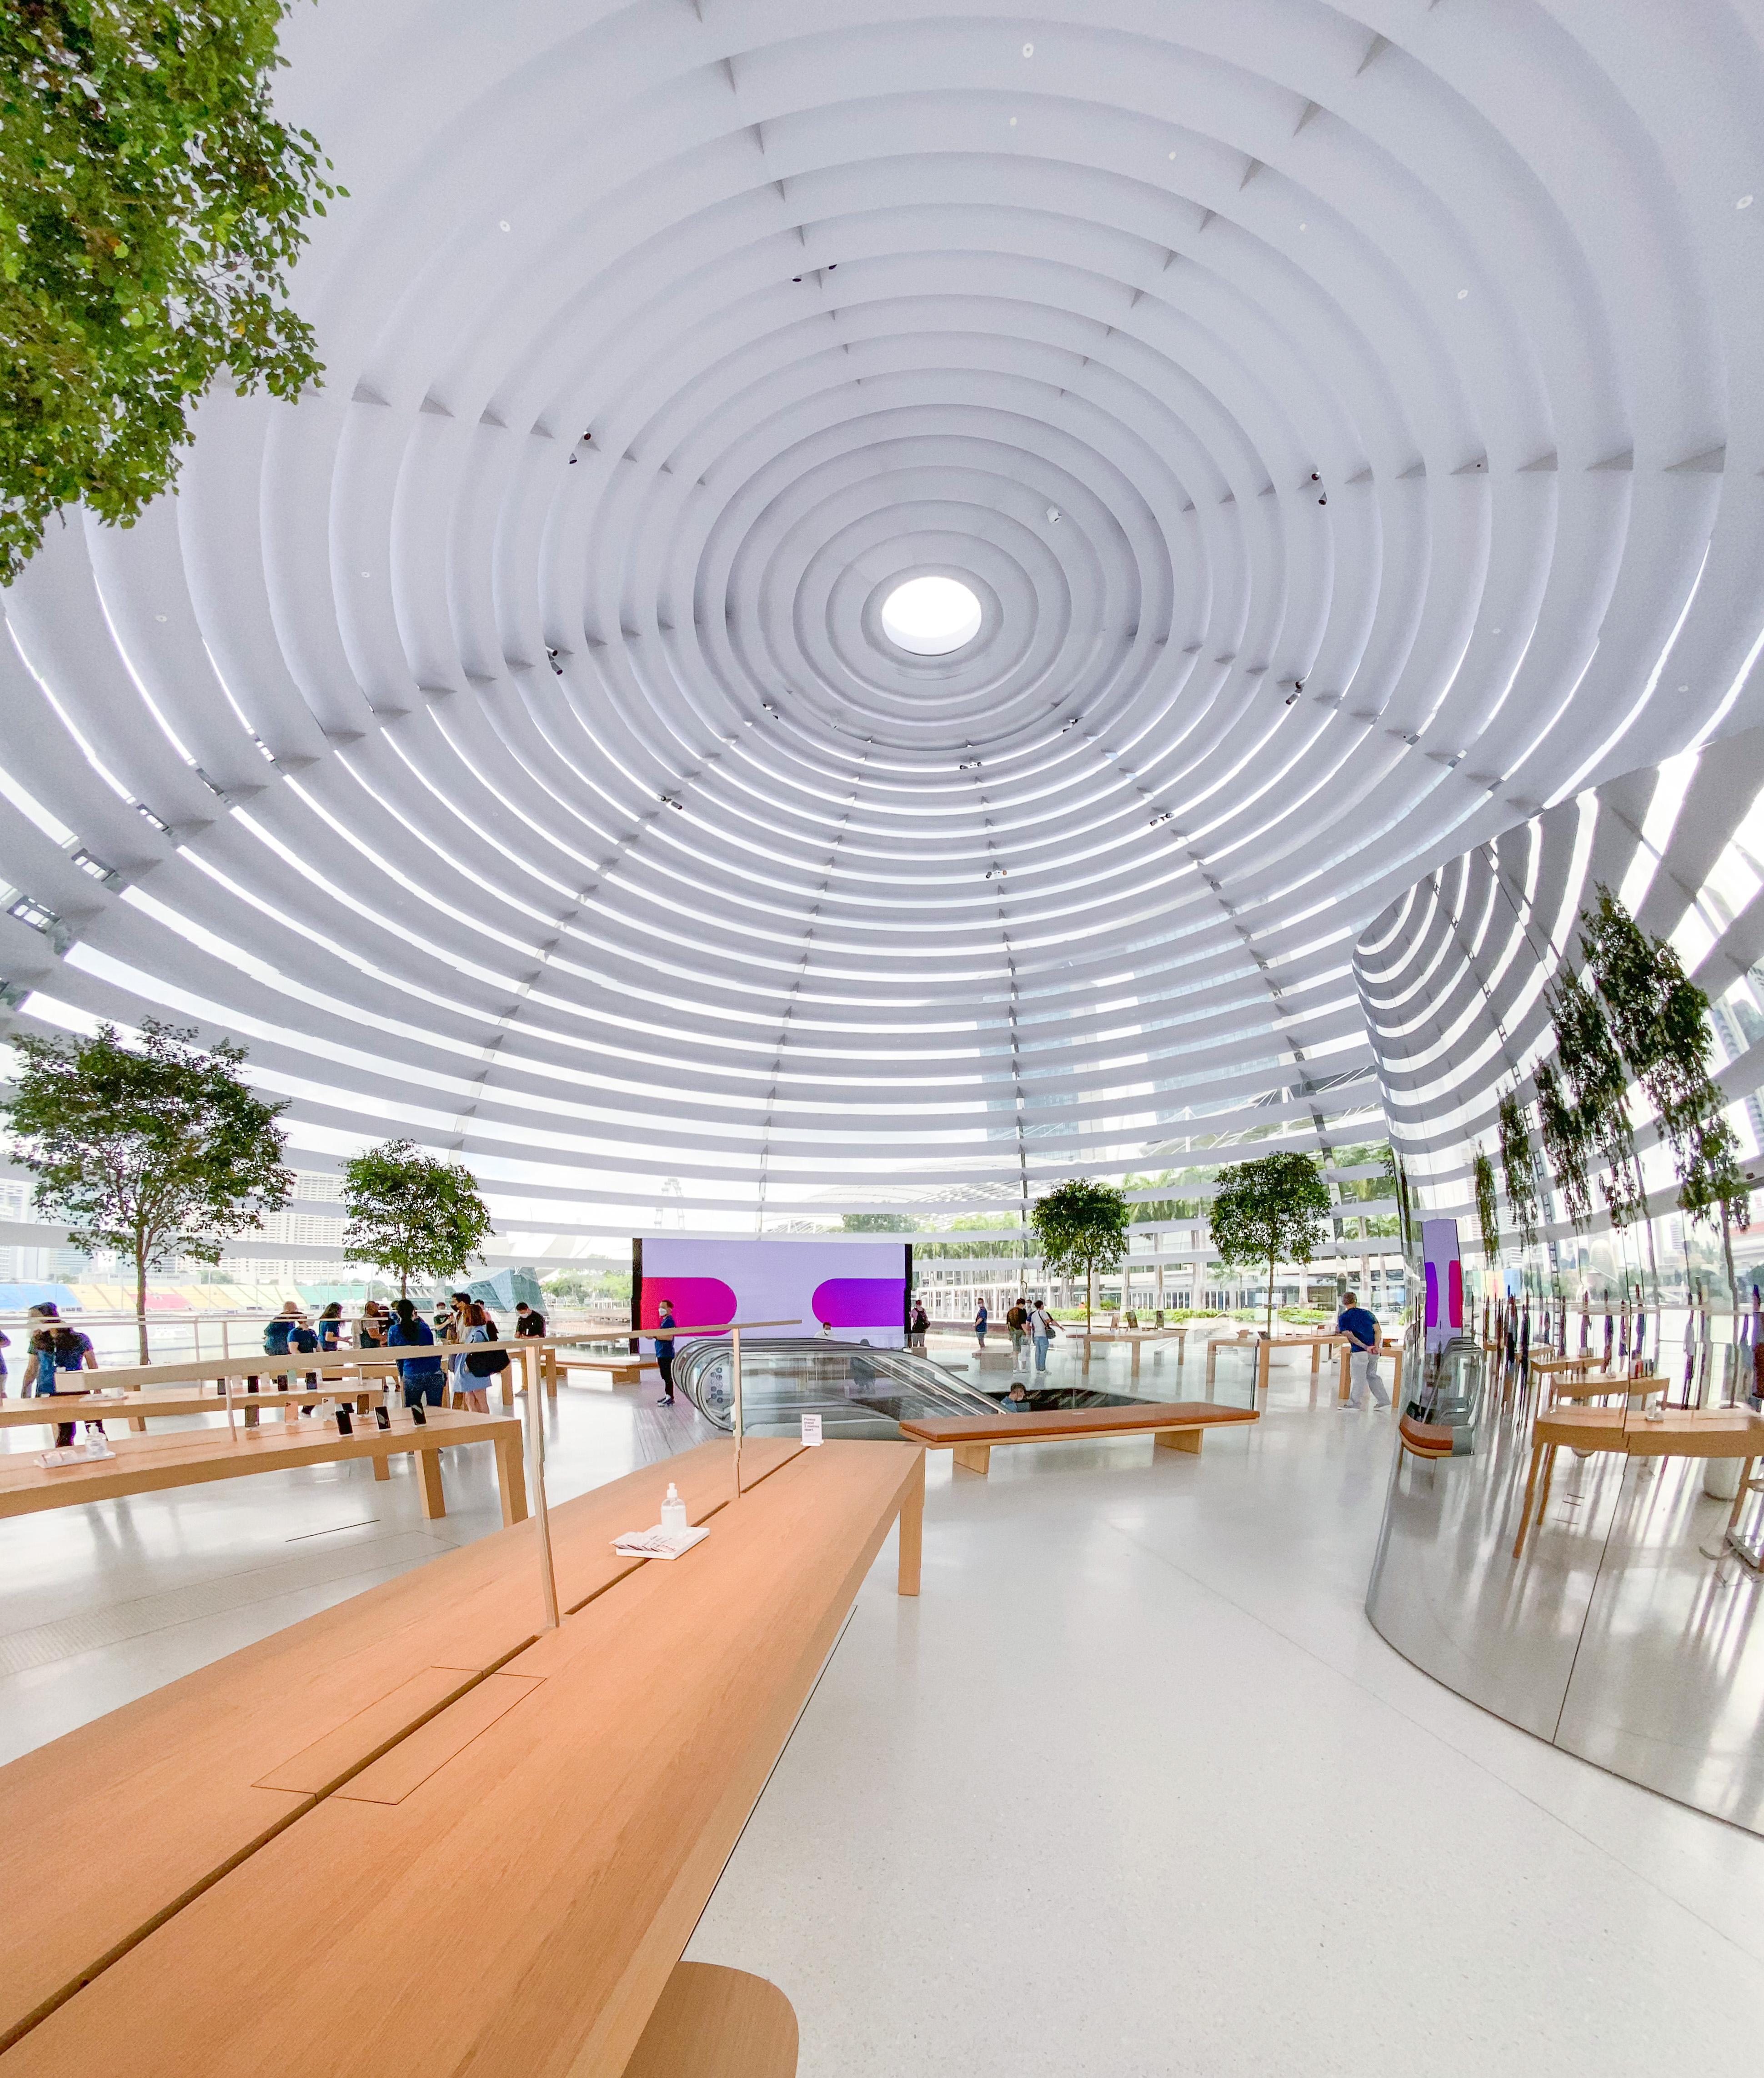 Aug. 28, 2020, Singapore, Republic of Singapore, Asia - View of the new  Apple flagship store on the waterfront in Marina Bay Sands with the  business district skyline in the background. The